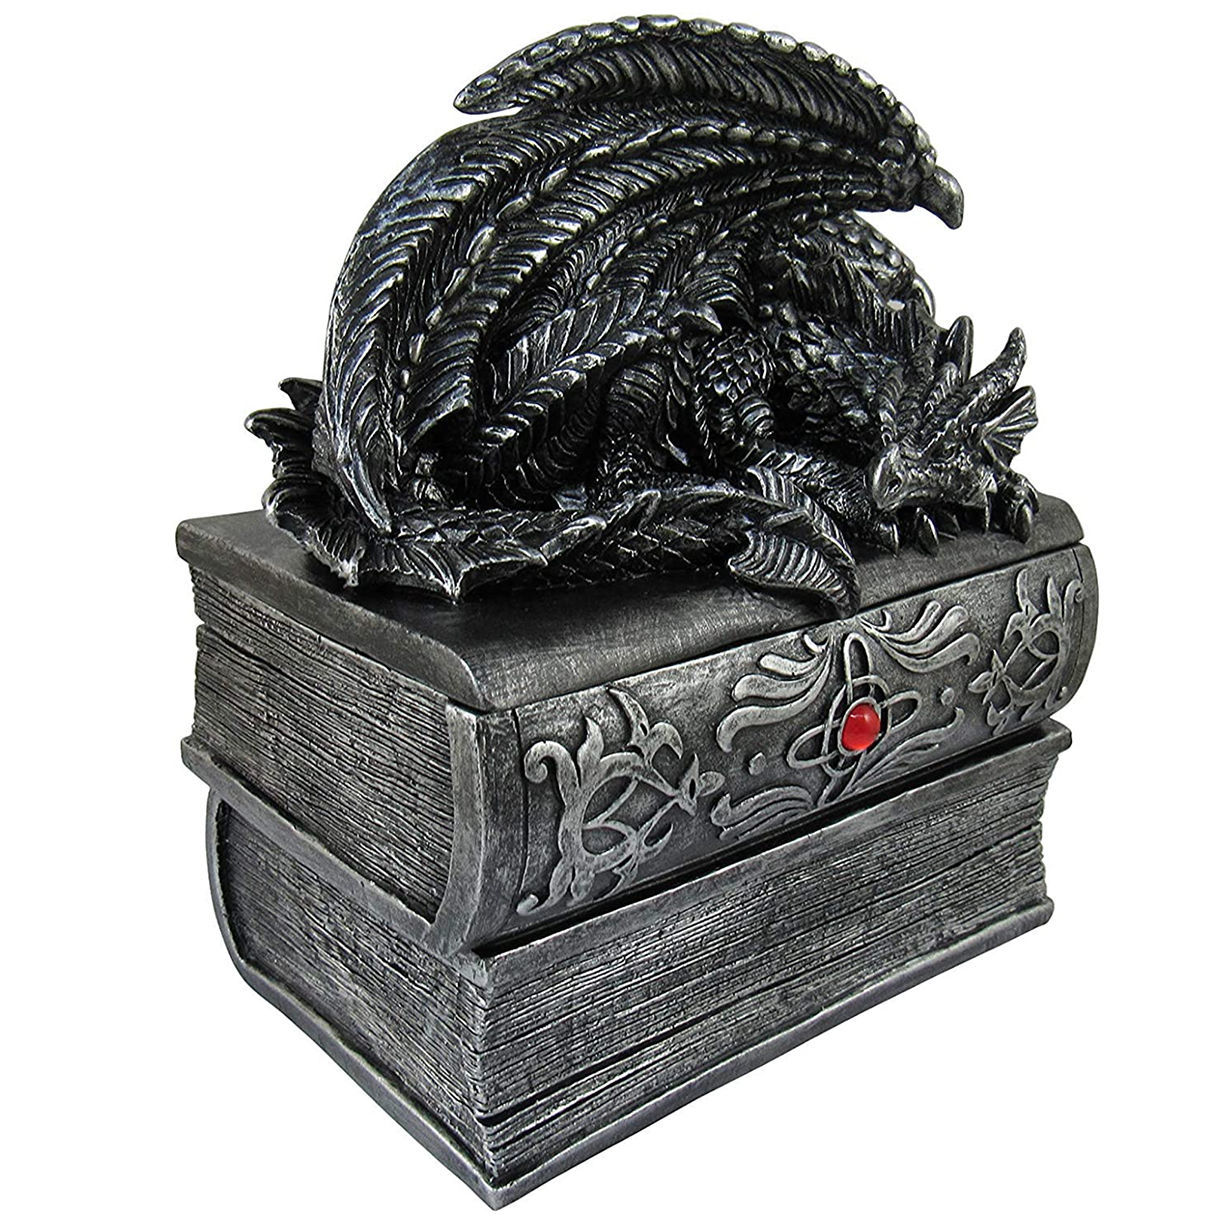 Do Not Disturb Trinket Box has sleeping dragon atop stack of books that open, revealing secret compartment to stash valuables